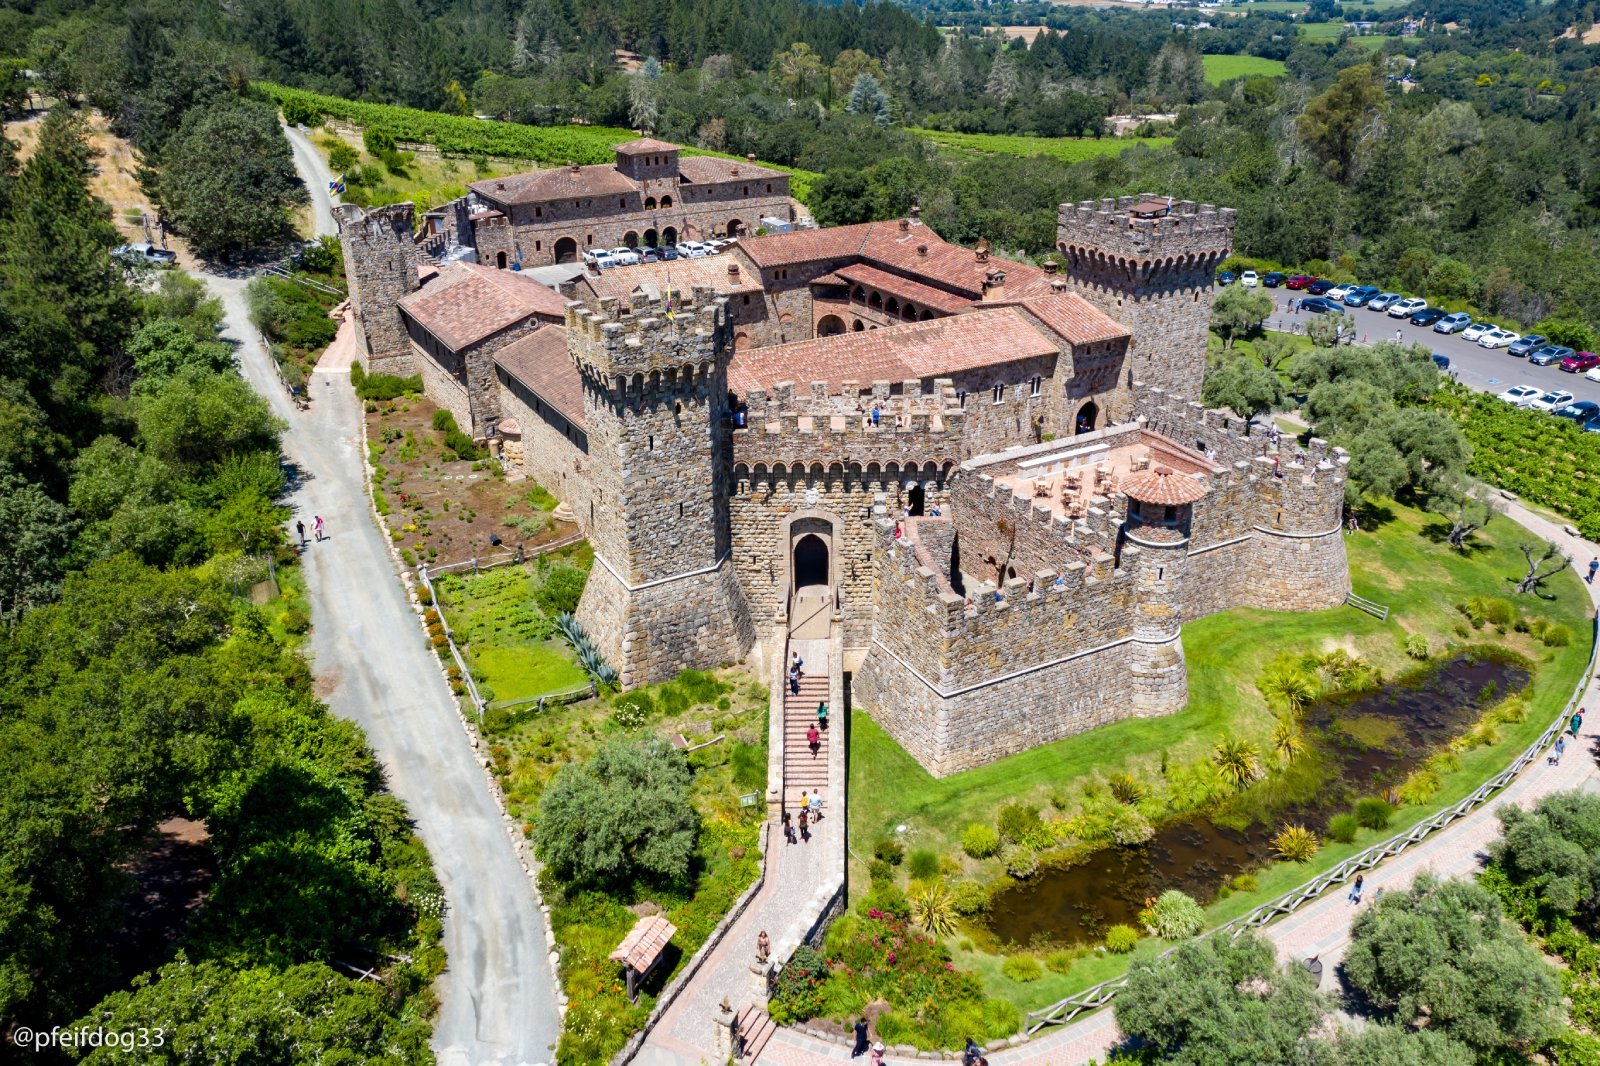 <p class="wp-caption-text">Image Credit: Shutterstock / Christopher Pfeifer</p>  <p><span>Castello di Amorosa highlights the enduring allure of medieval architecture brought to life in the heart of Napa Valley. This authentically-styled 13th-century castle offers a visual feast and houses some of the region’s most esteemed wines. Visitors can embark on guided tours that reveal the castle’s grandeur, from its defensive fortifications to its underground cellars, culminating in tastings of estate wines amidst the backdrop of panoramic valley views.</span></p>